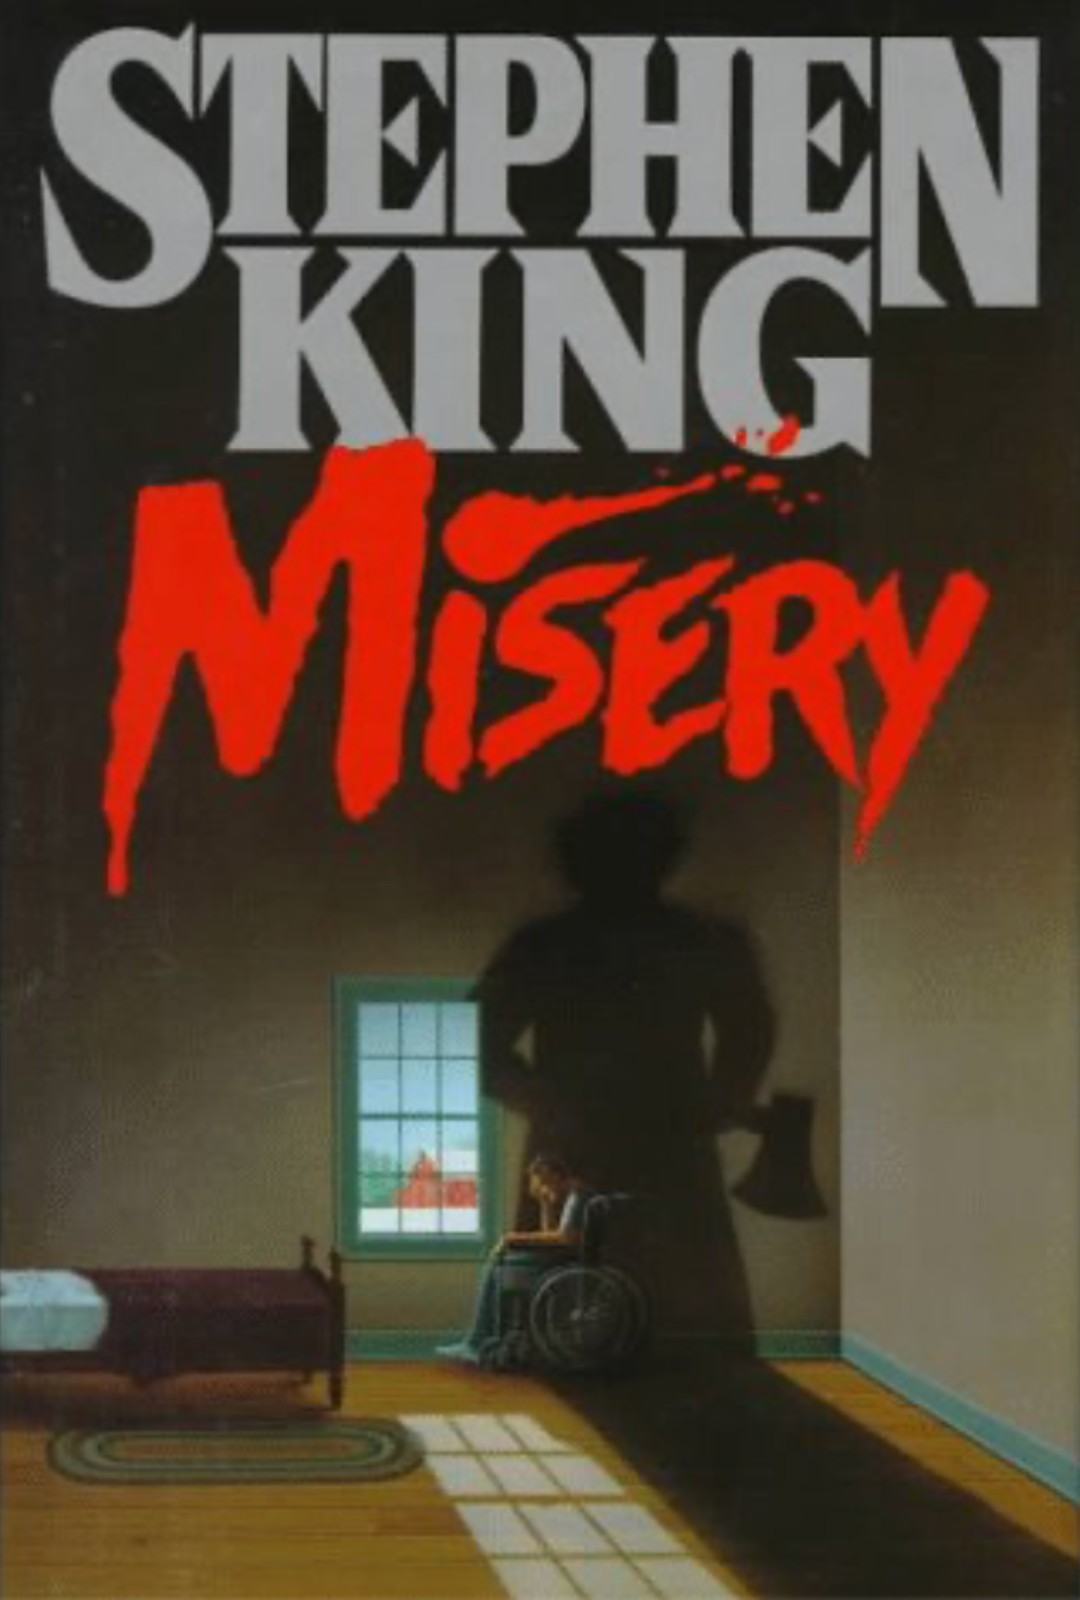 Misery-book-cover-1080-1600.png